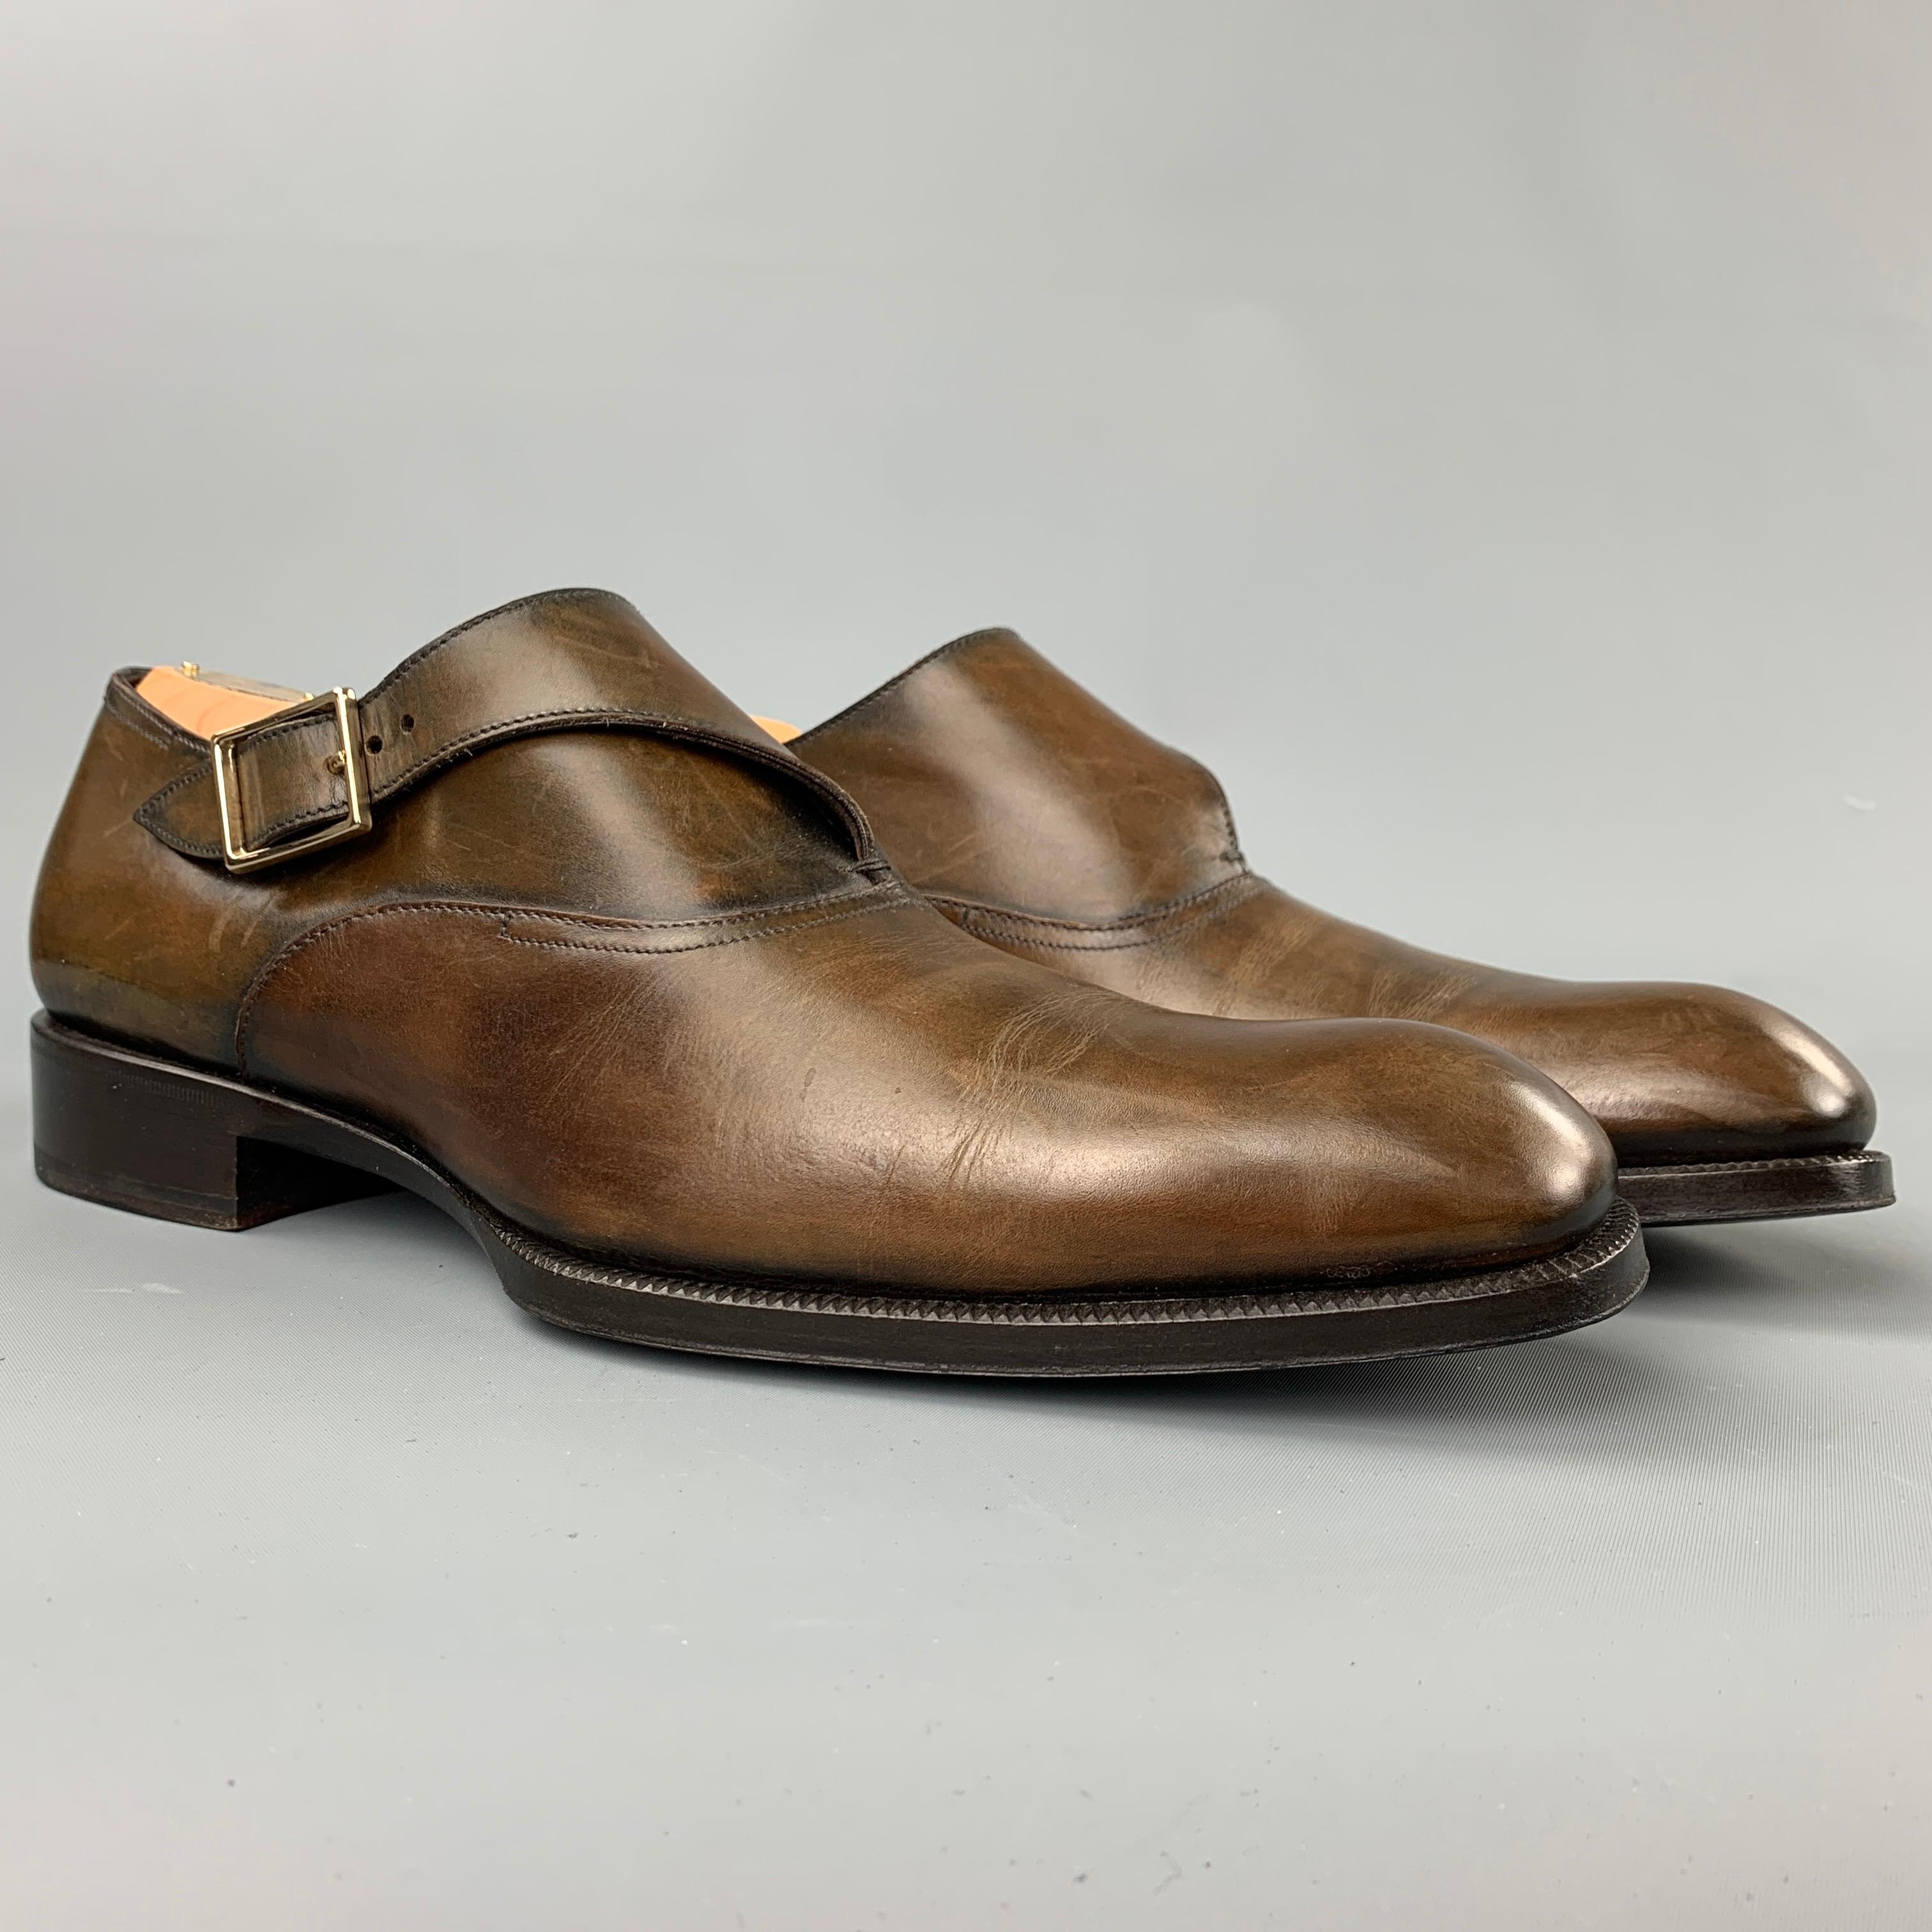 TOM FORD loafers comes in a brown antique leather featuring a monk strap detail, cap toe, and a wooden sole. Made in Italy.

Very Good Pre-Owned Condition.
Marked: 10 TT
Original Retail Price: $1,790.00

Outsole: 12.5 in. x 4 in. 